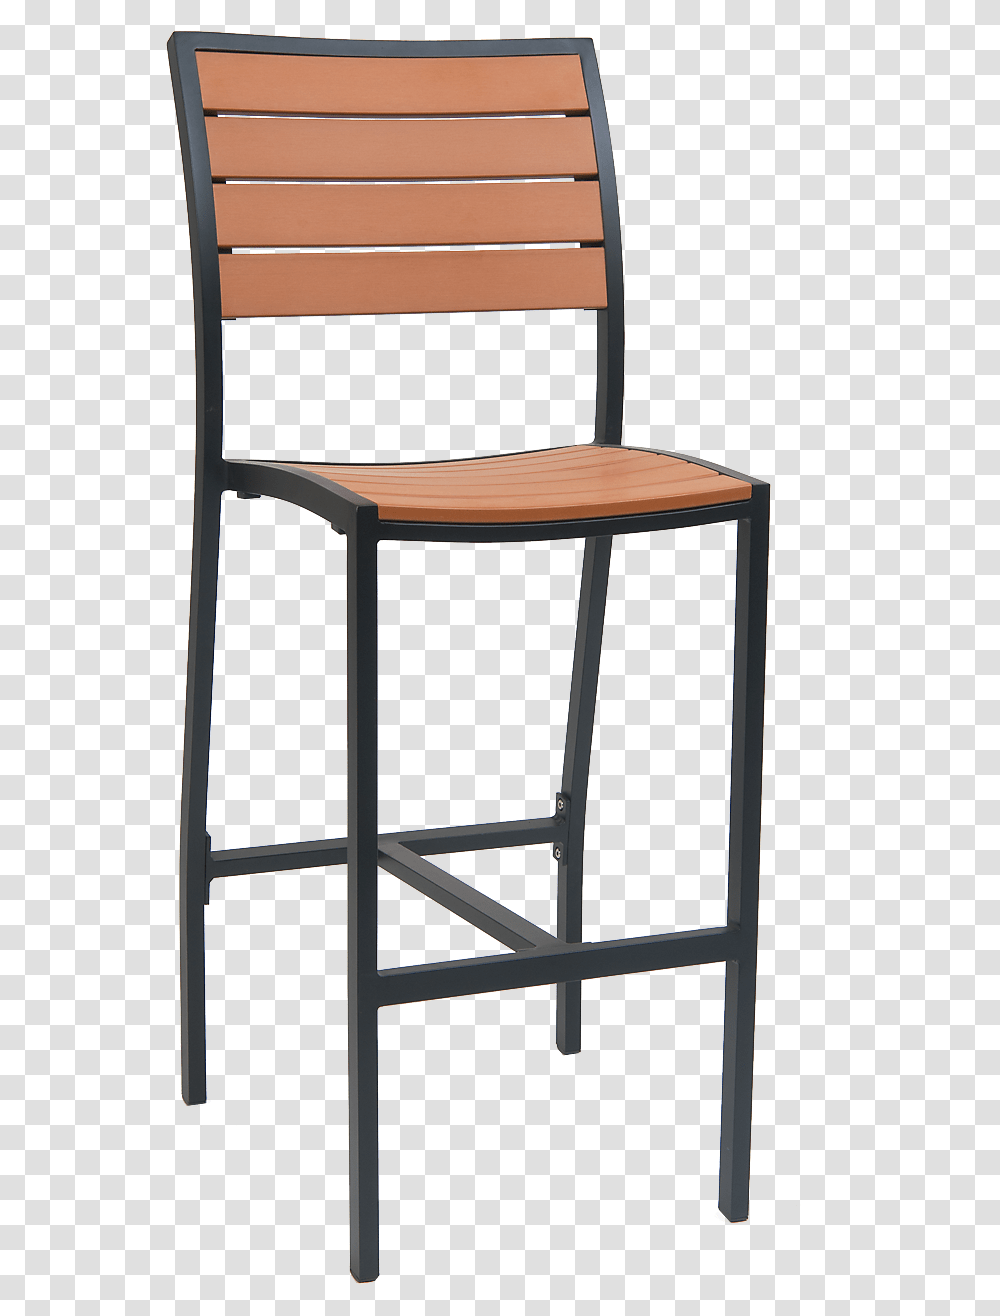 Zoomable Bar Stool, Chair, Furniture, Stand, Shop Transparent Png